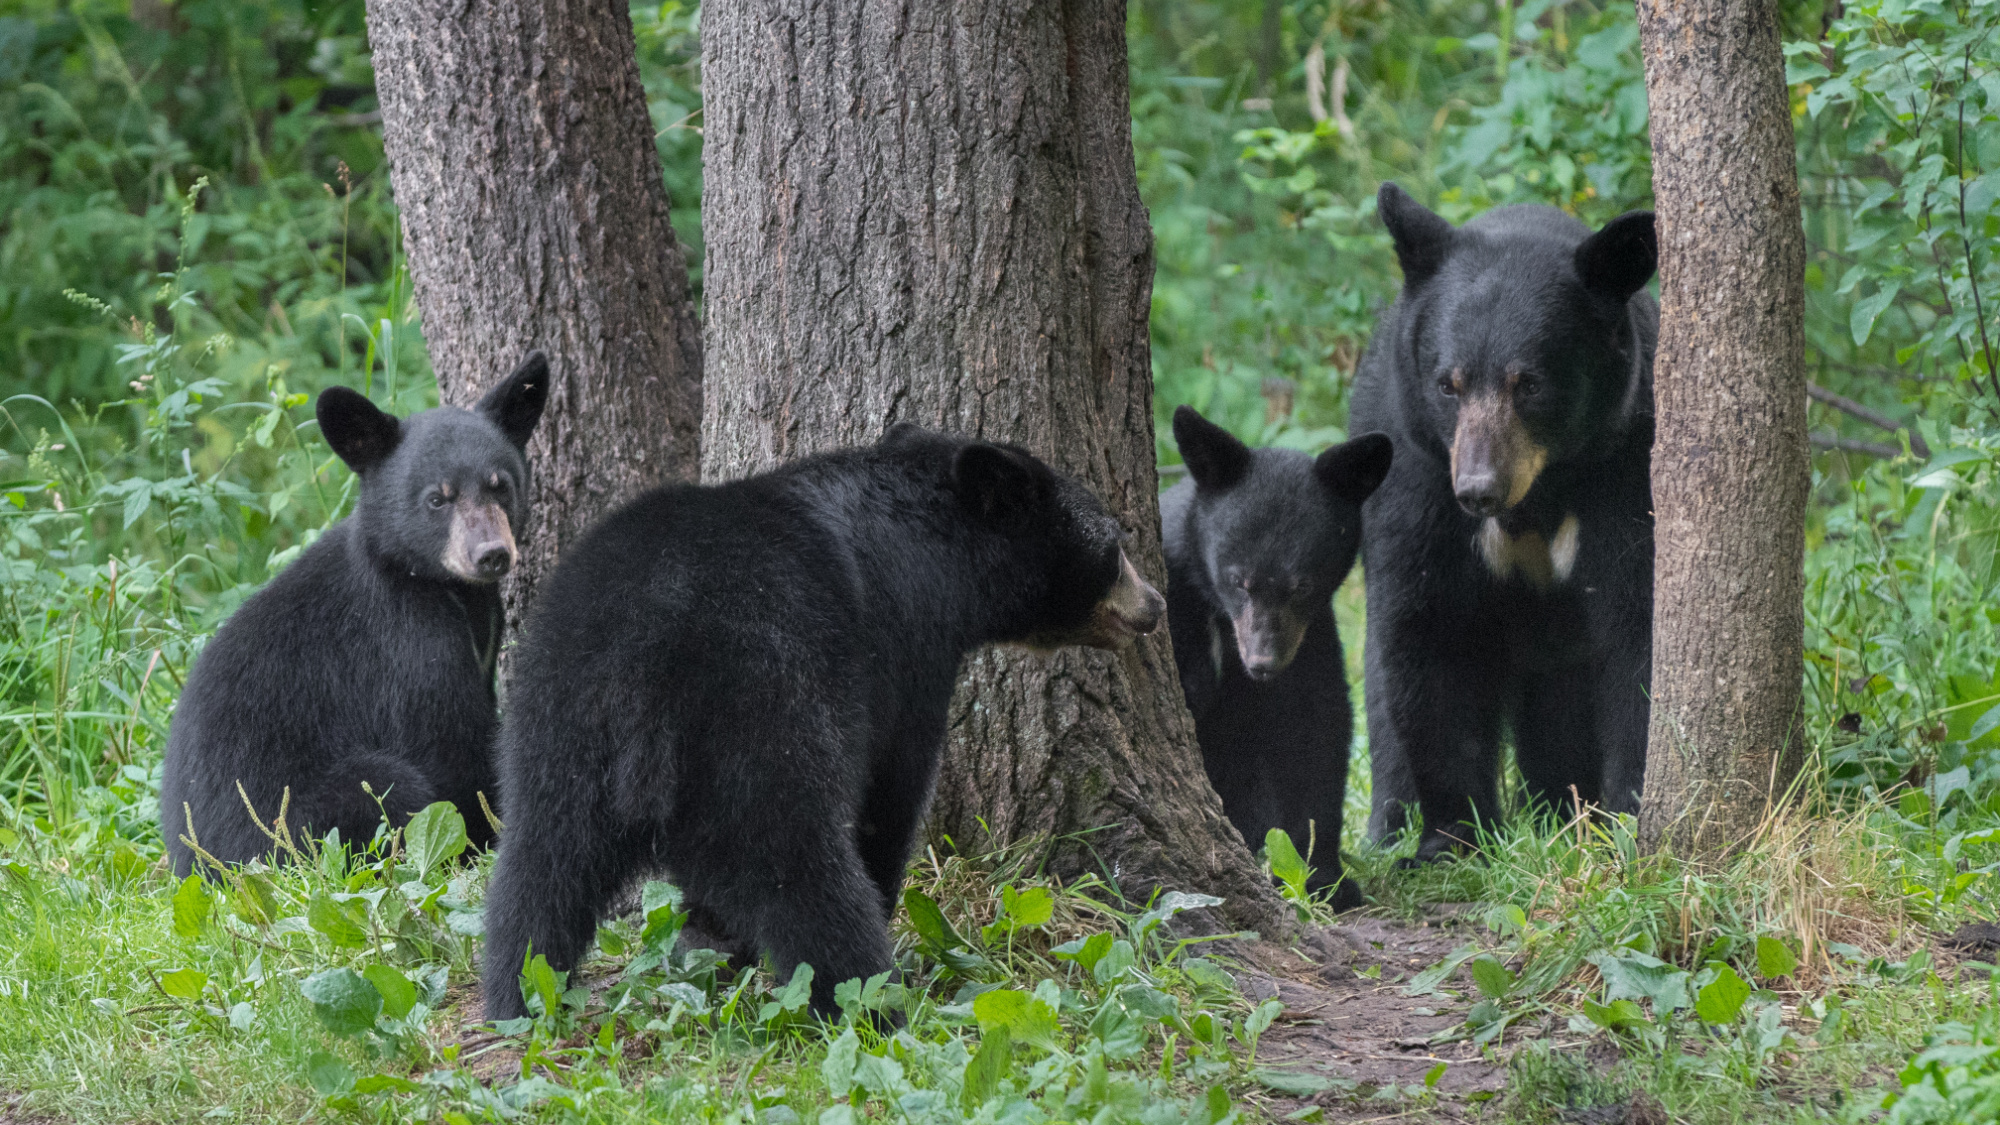 A sow black bear and three cubs sit near a tree.